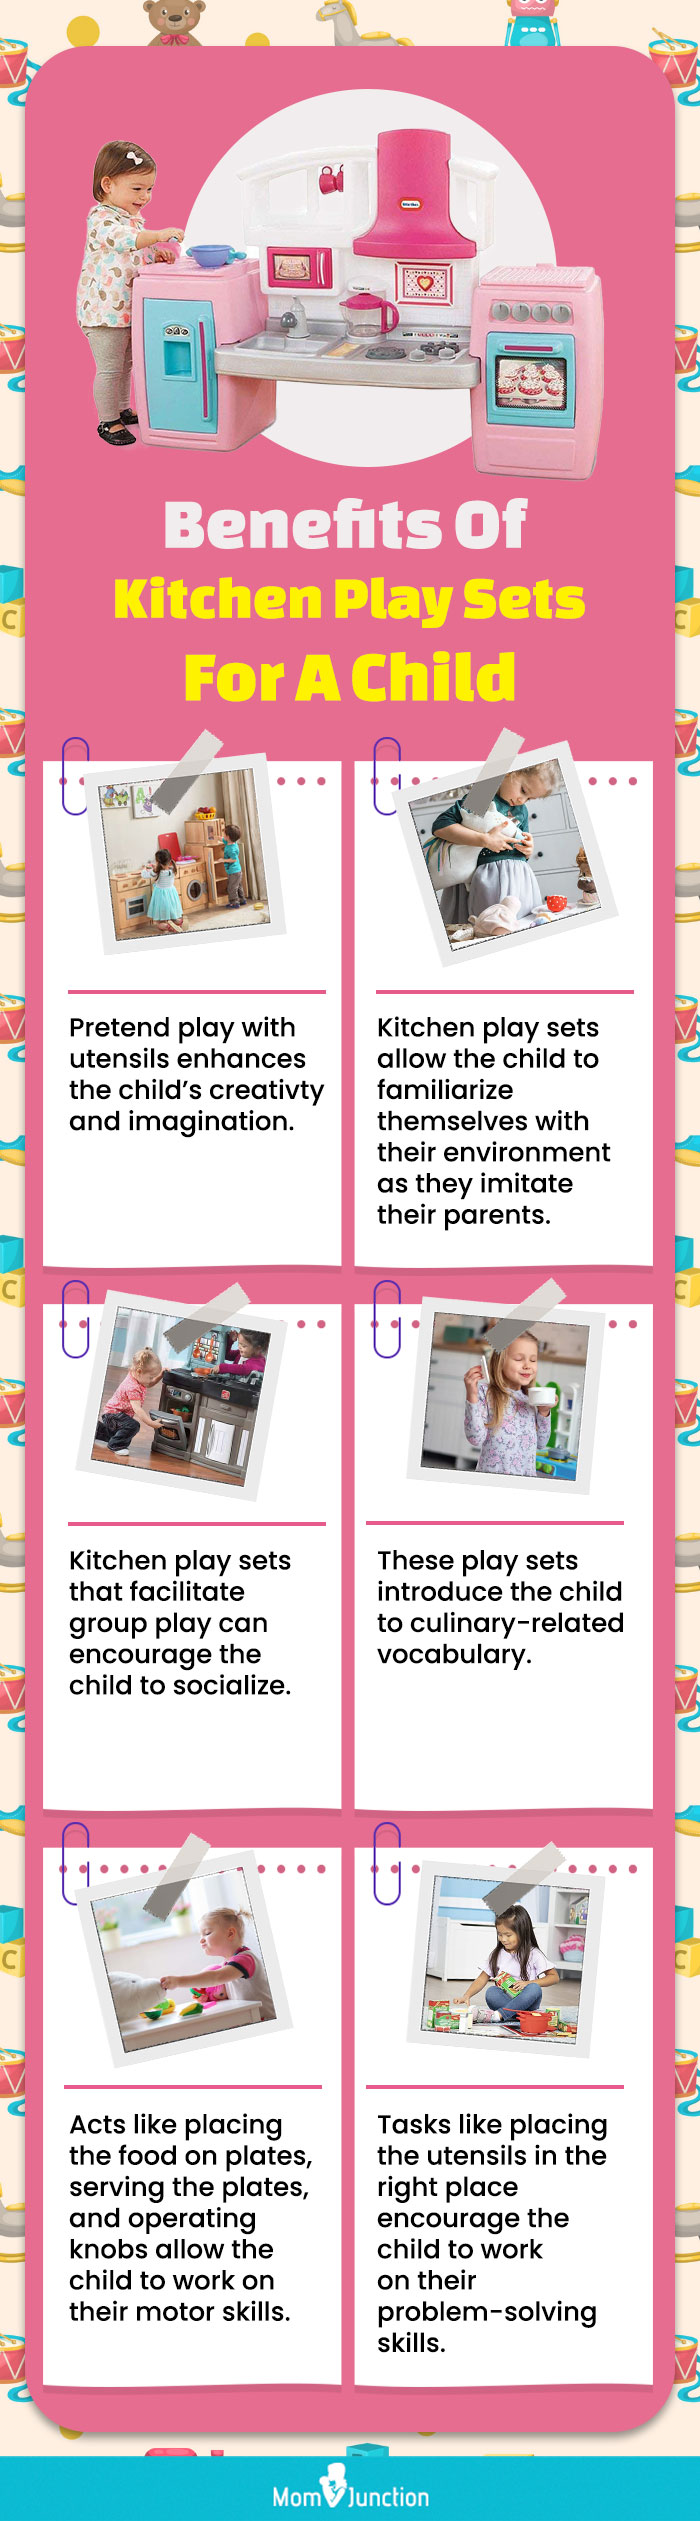 Benefits Of Kitchen Playsets For A child (infographic)